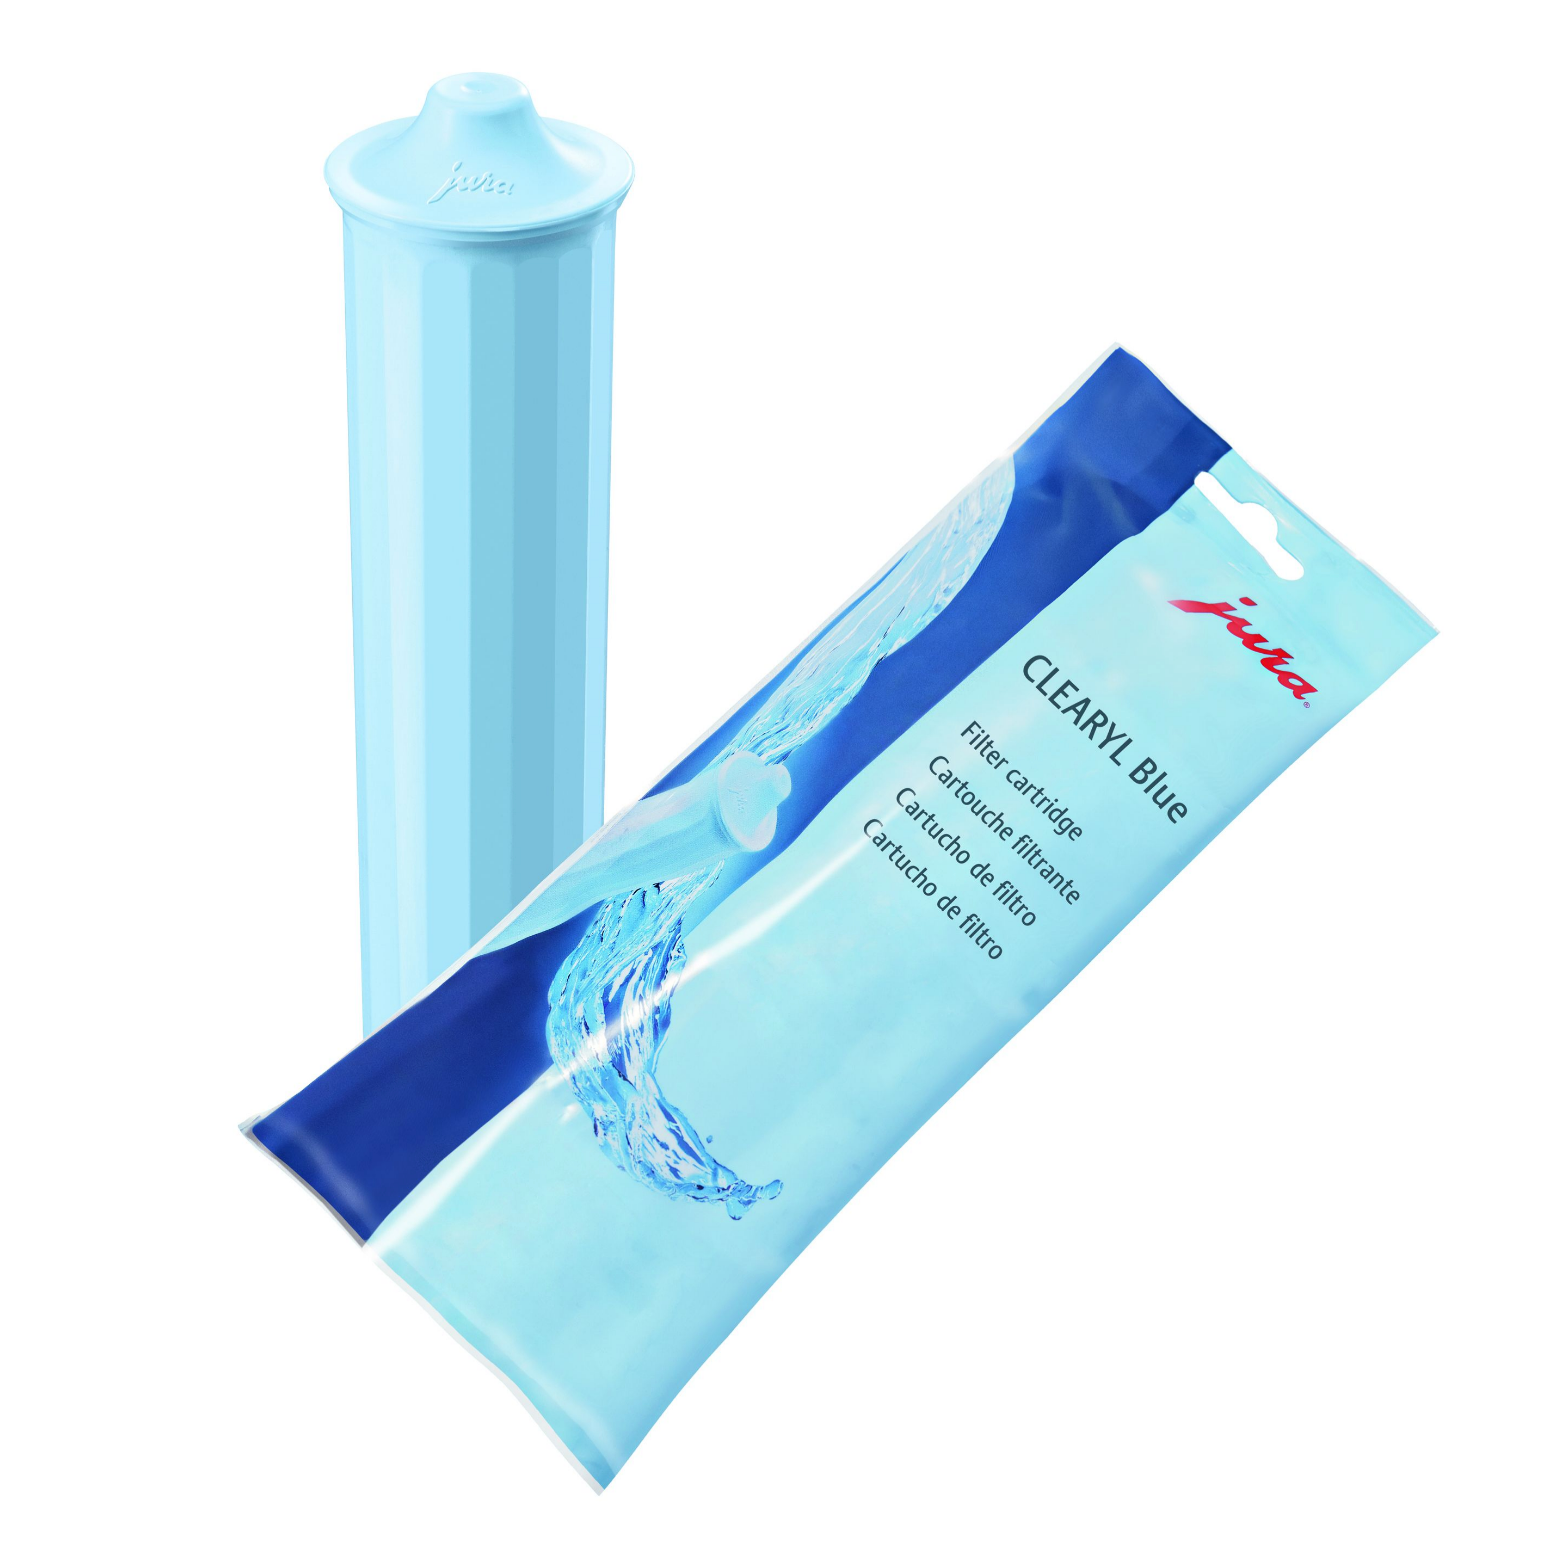 Jura Clearyl Blue Water Filter 71445